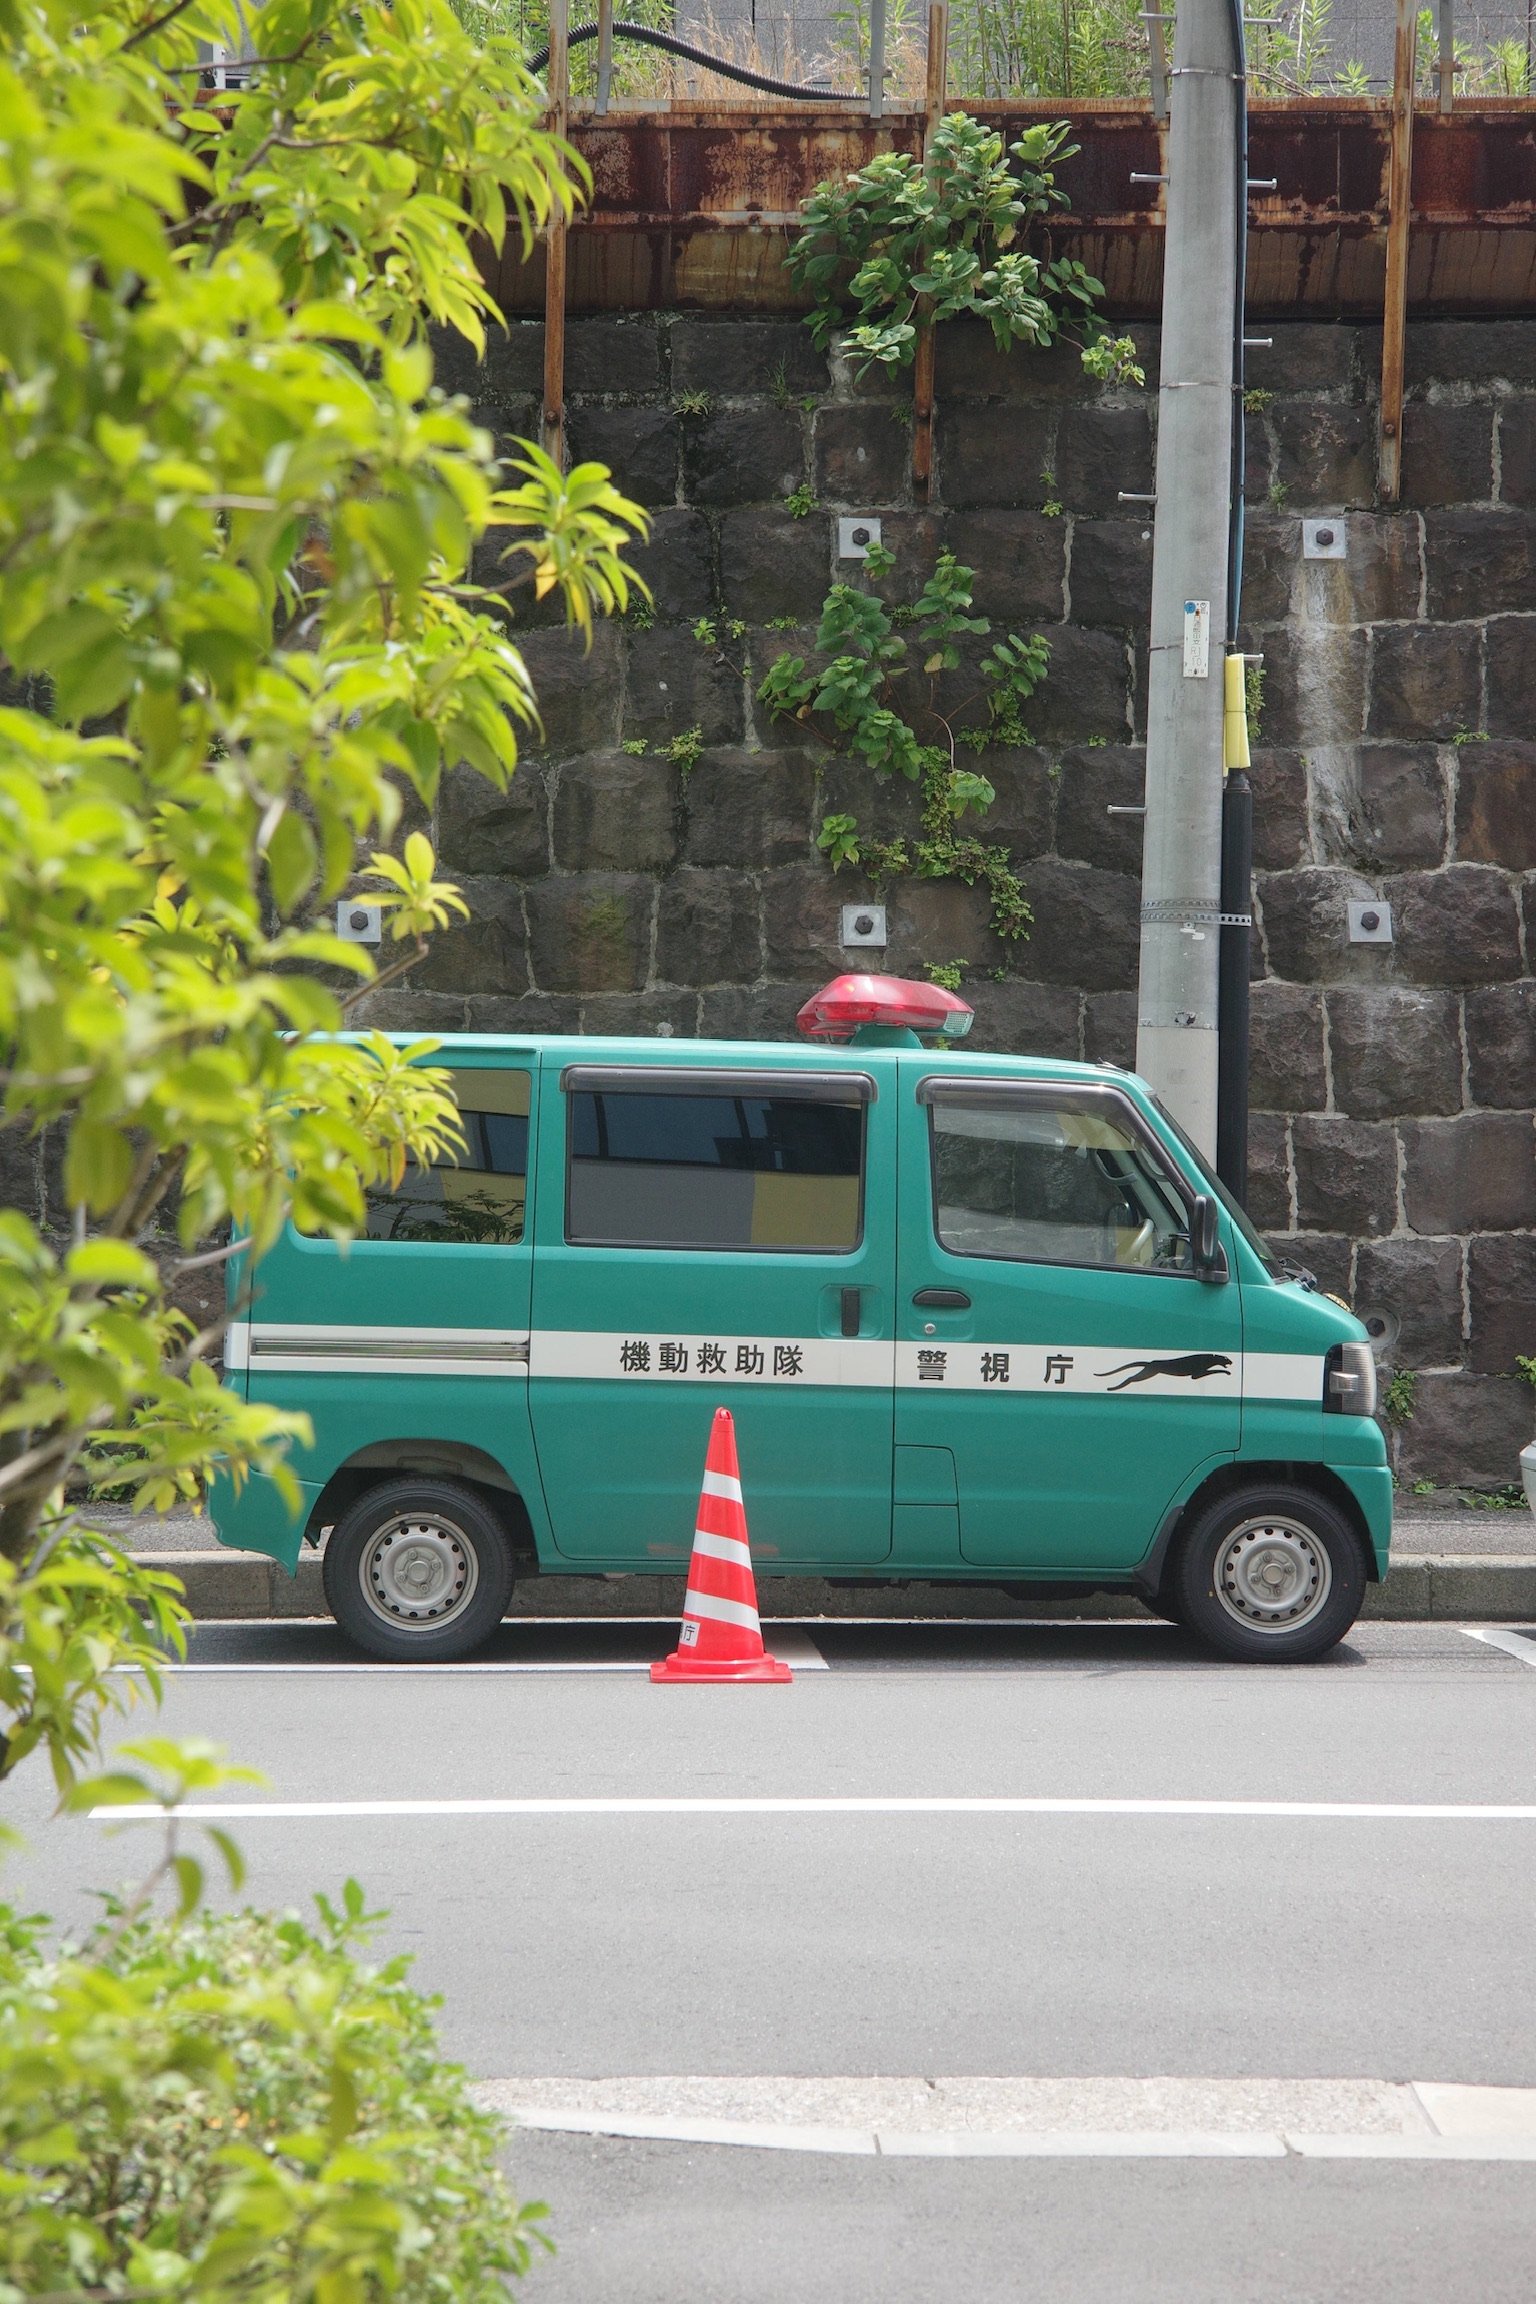 a green japanese police vehicle parked on the side of a road with traffic cones by it.